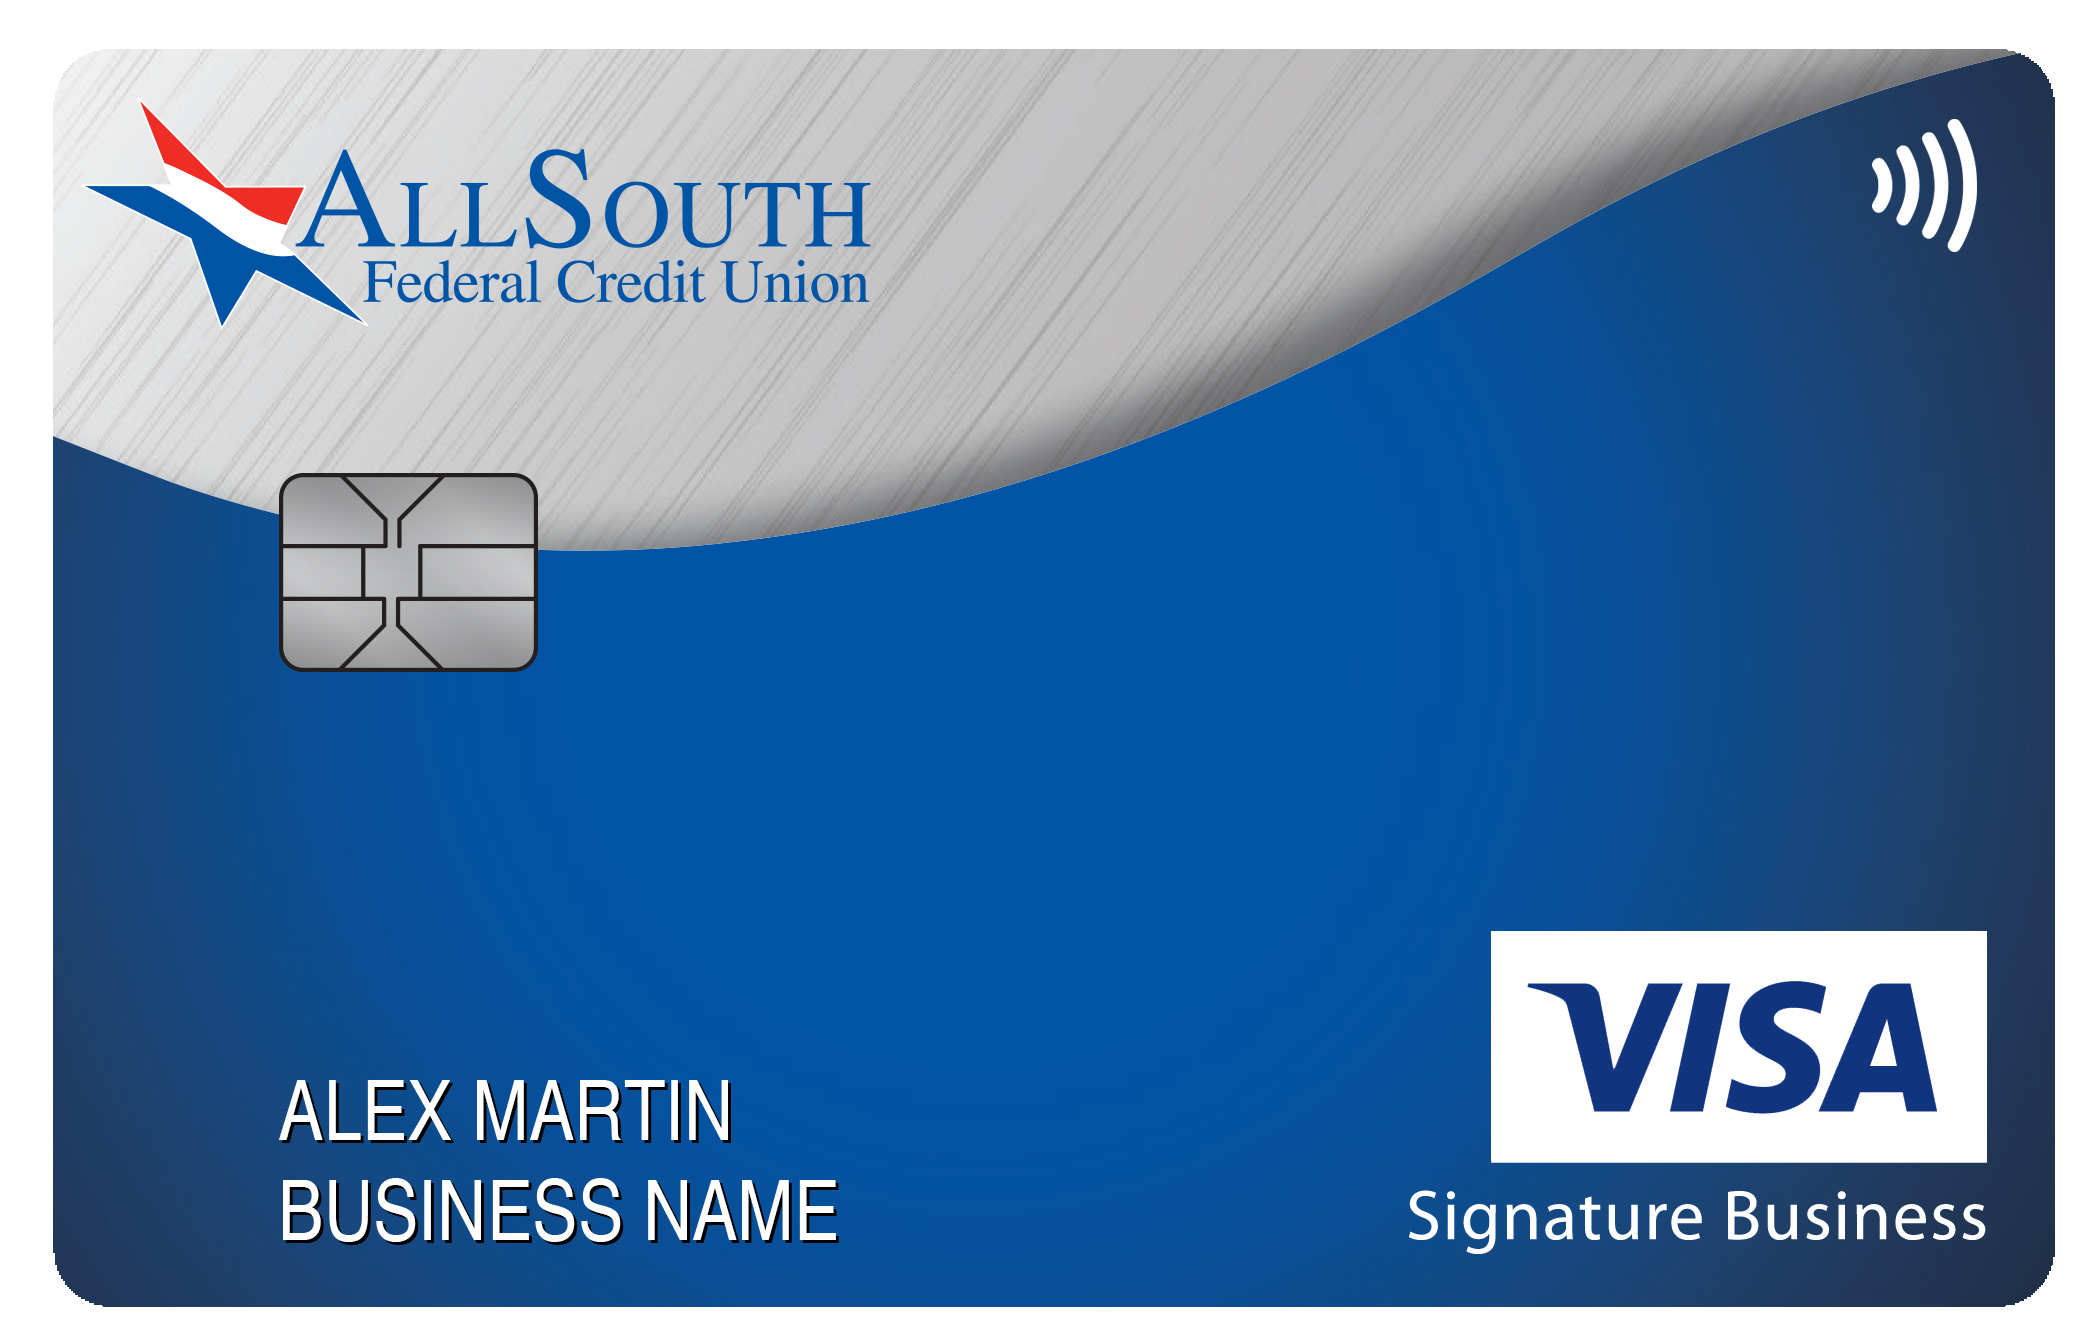 AllSouth Federal Credit Union Smart Business Rewards Card